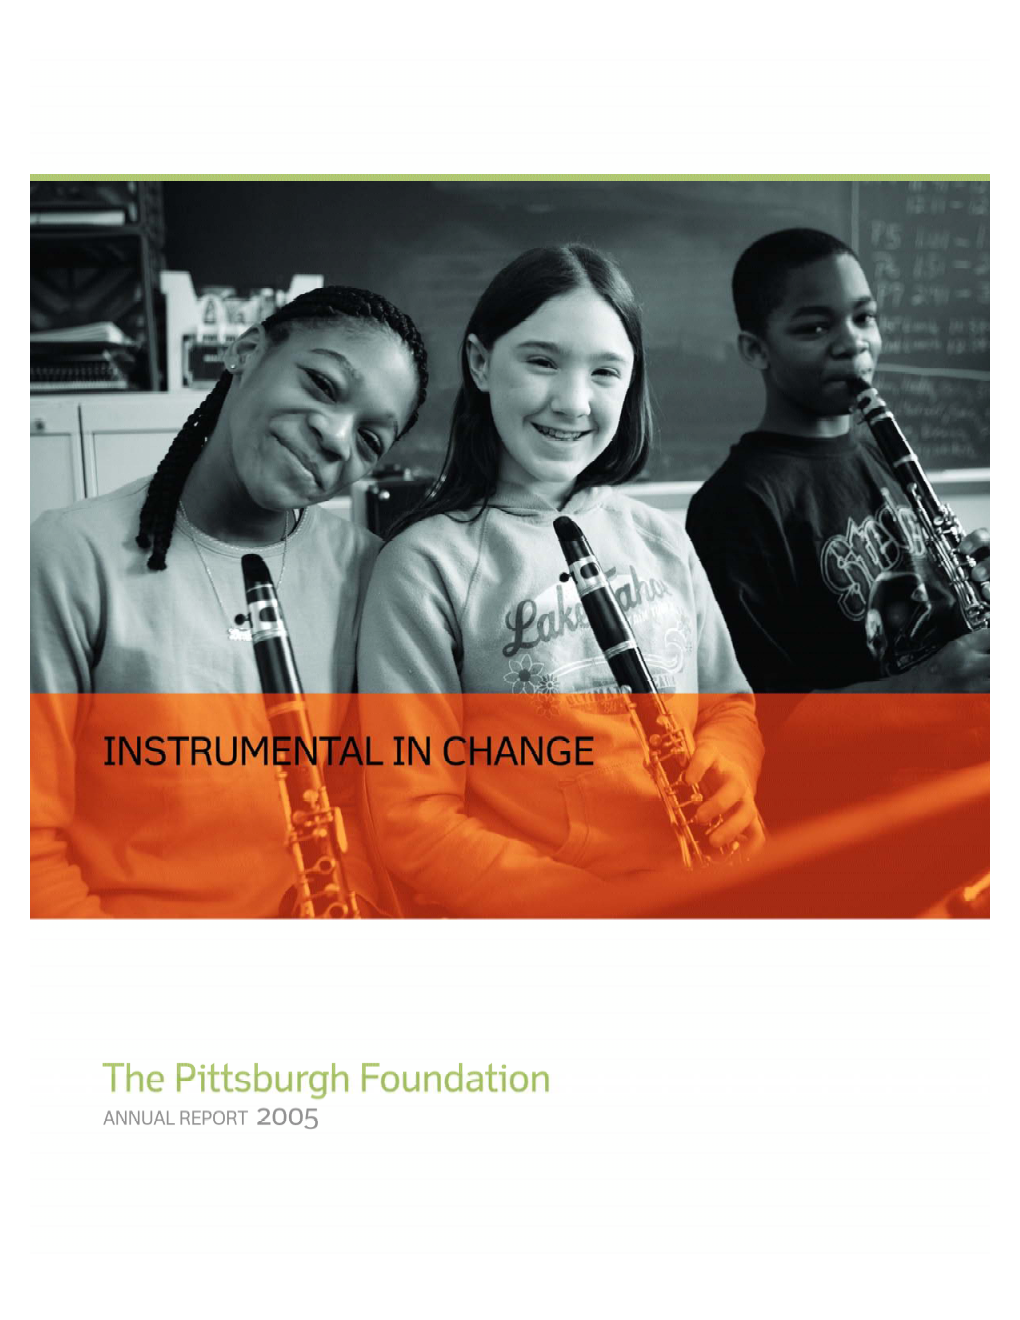 He Pittsburgh Foundation Works to Improve the Quality of Life in The